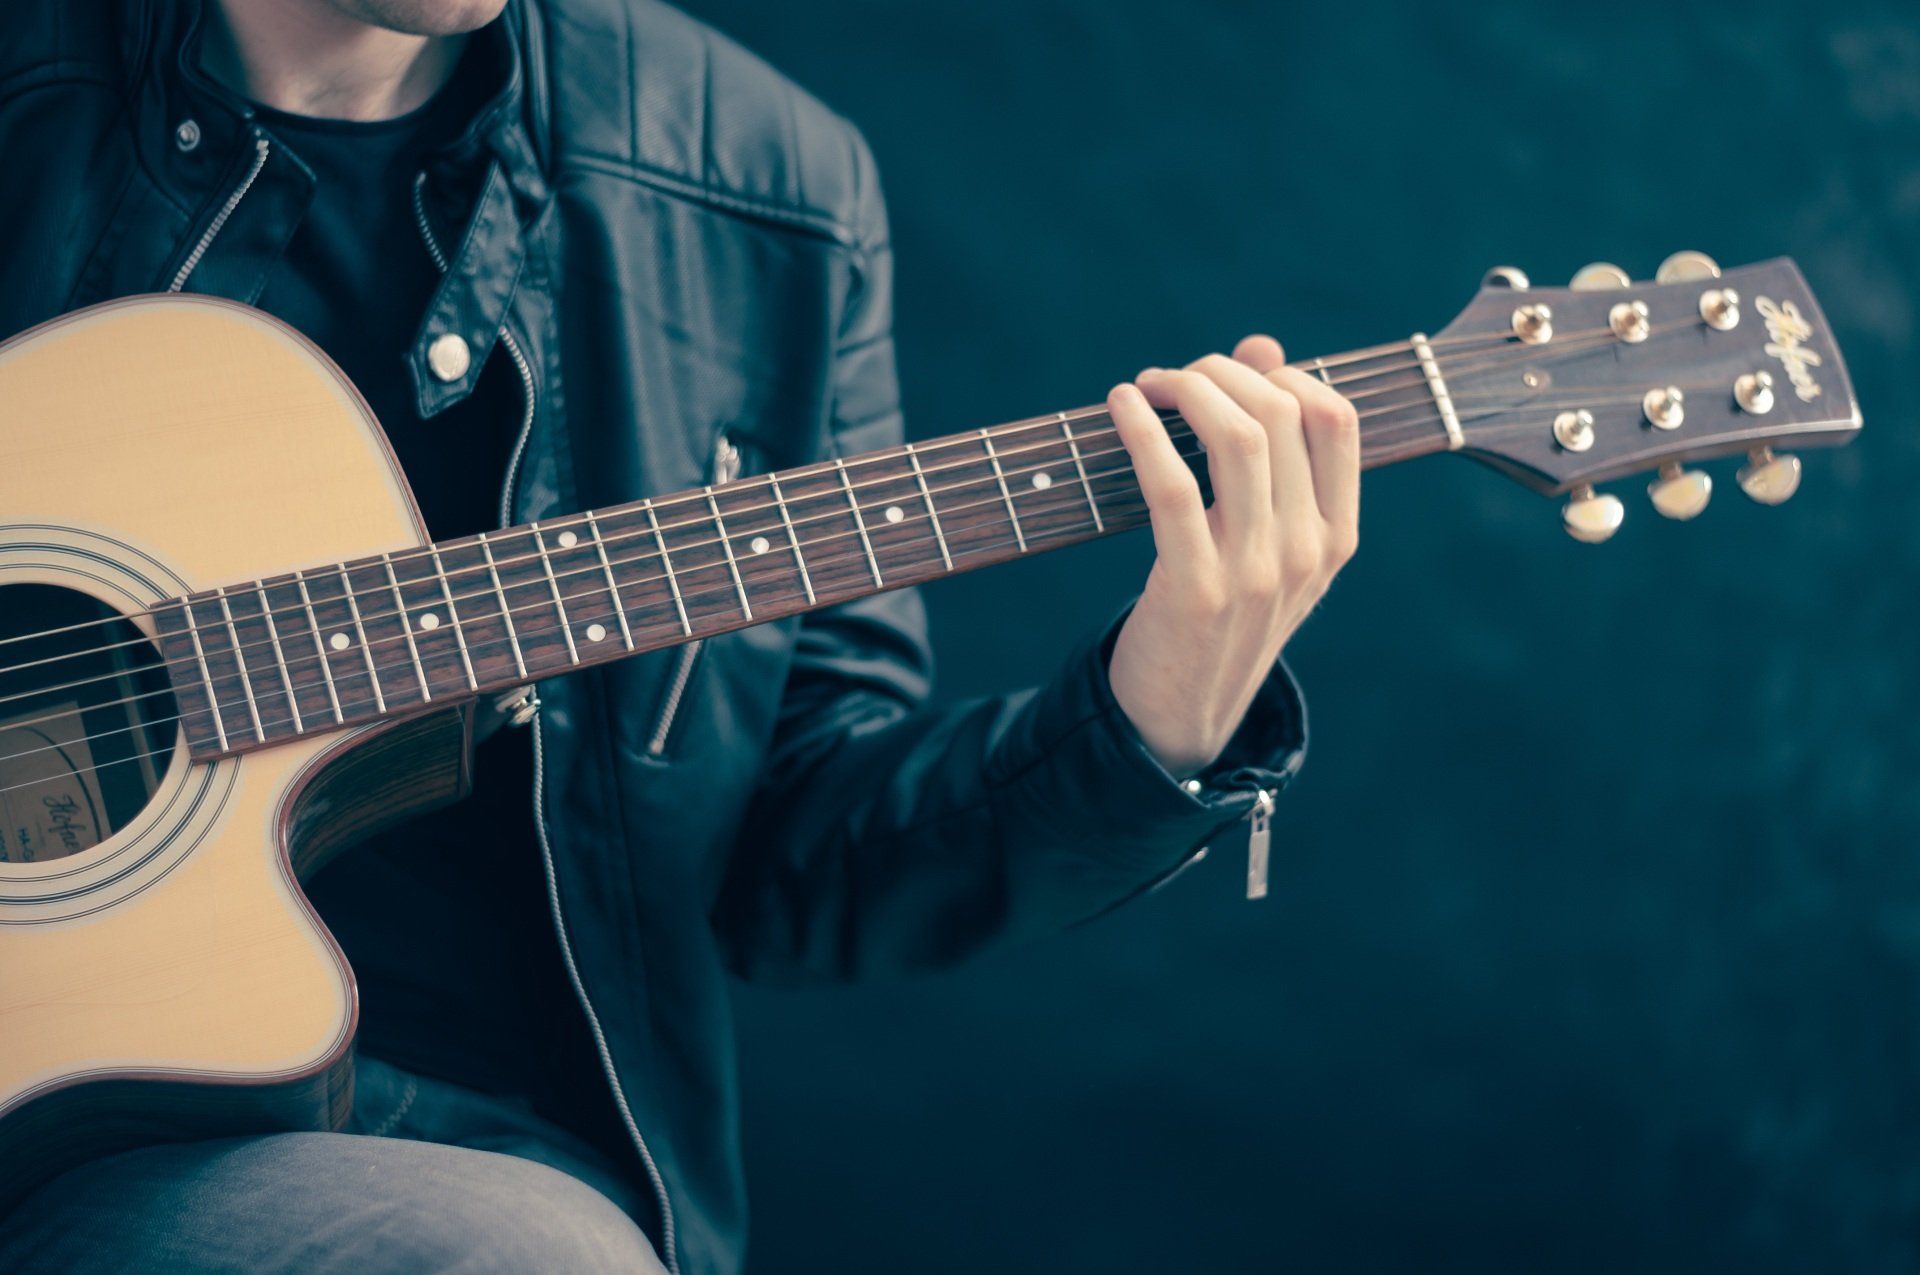 A man in a leather jacket is playing an acoustic guitar.